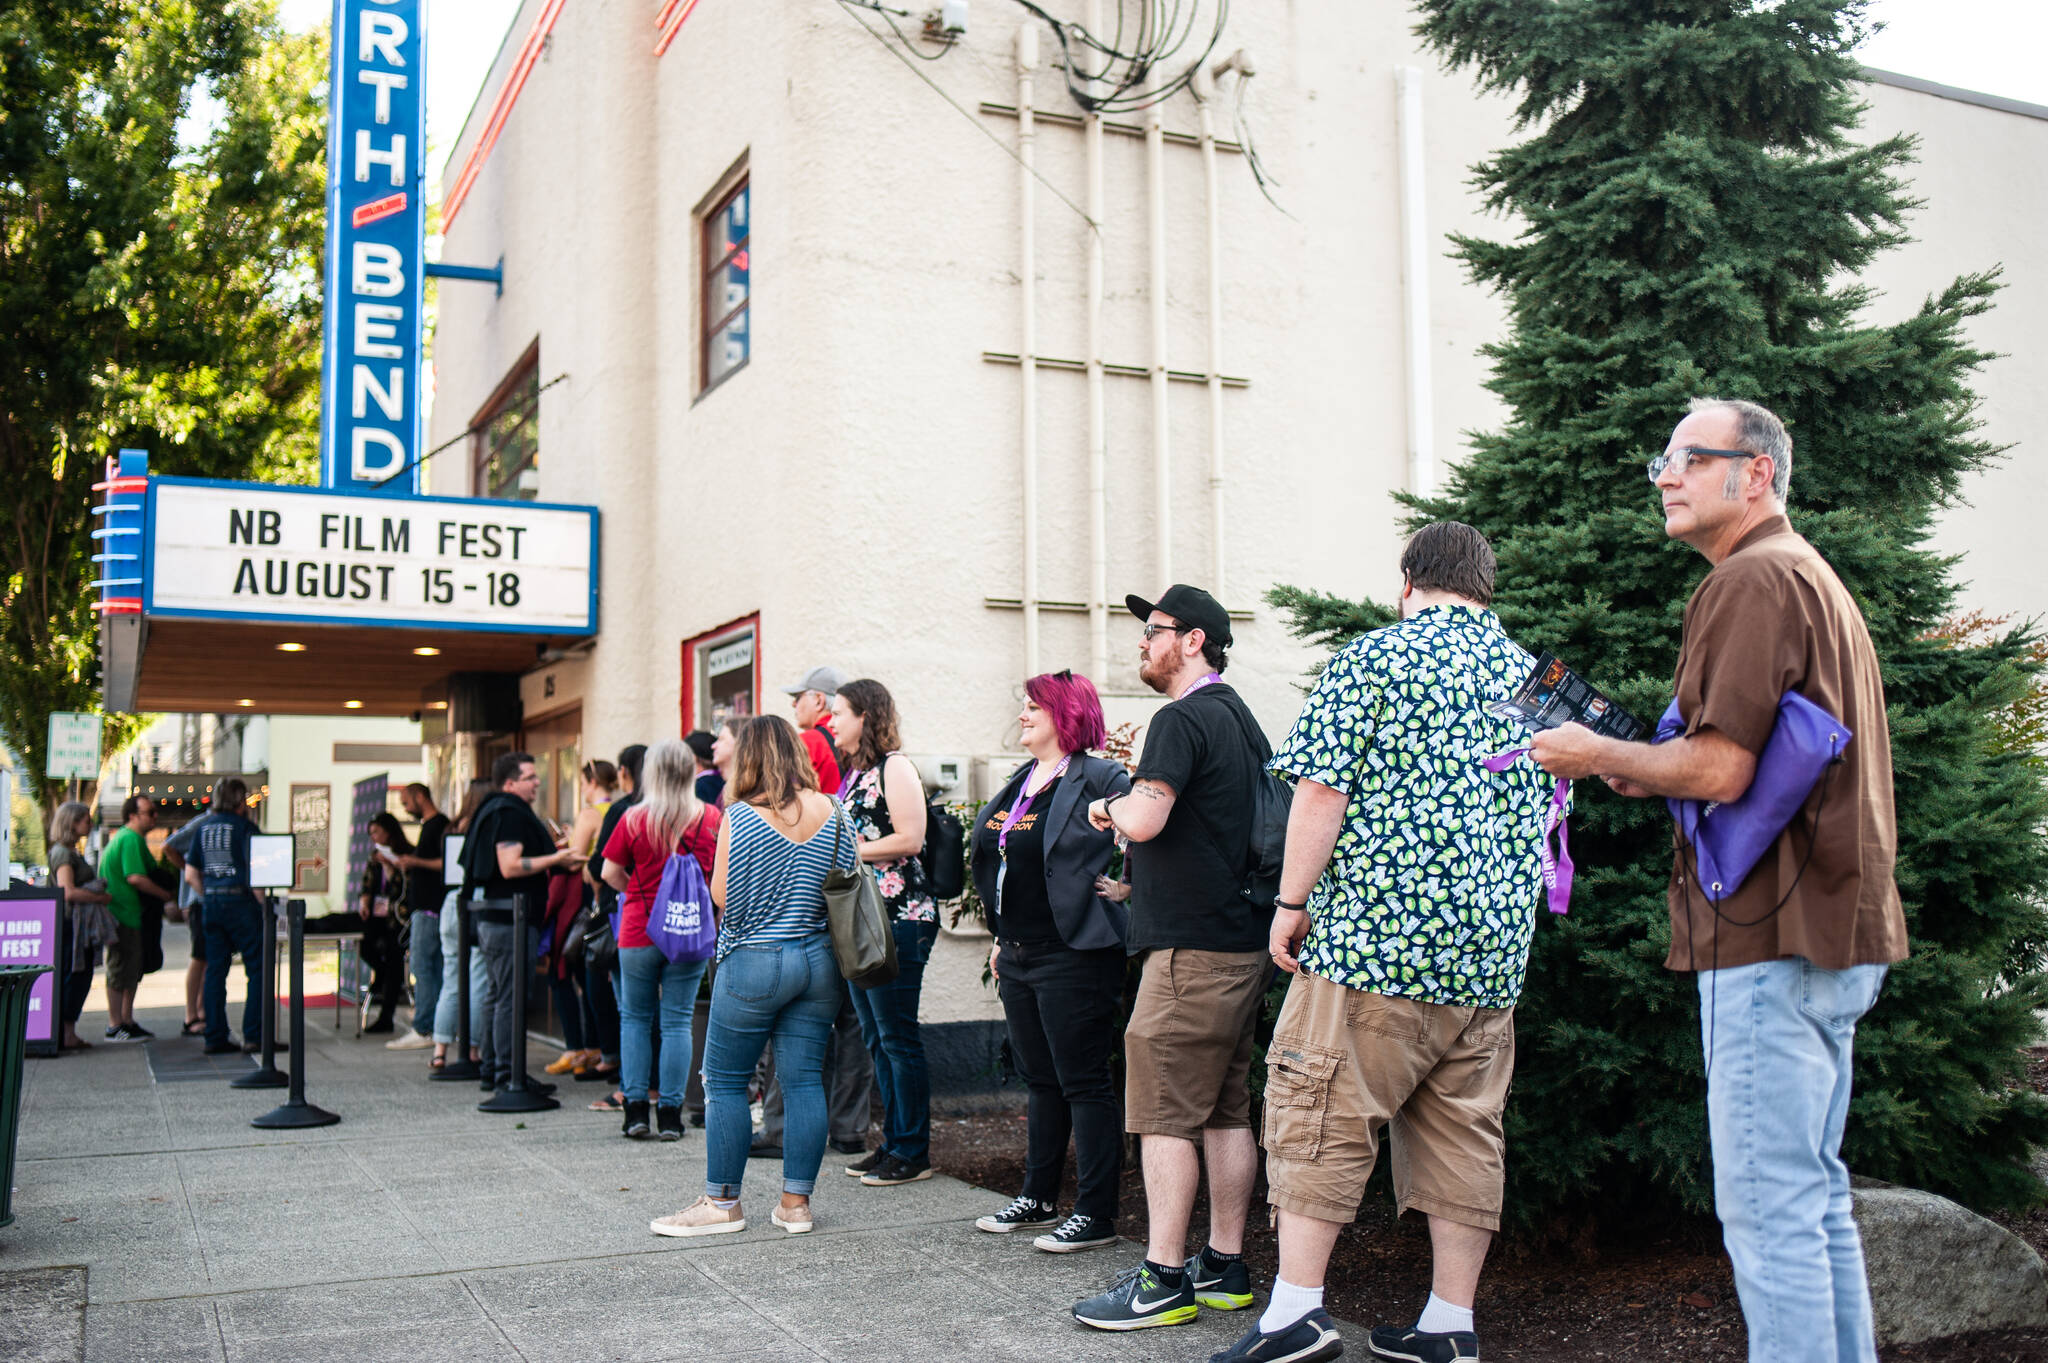 Patron wait in line outside the North Bend Theatre during the North Bend Film Fest. Photo courtesy of Jess Byers